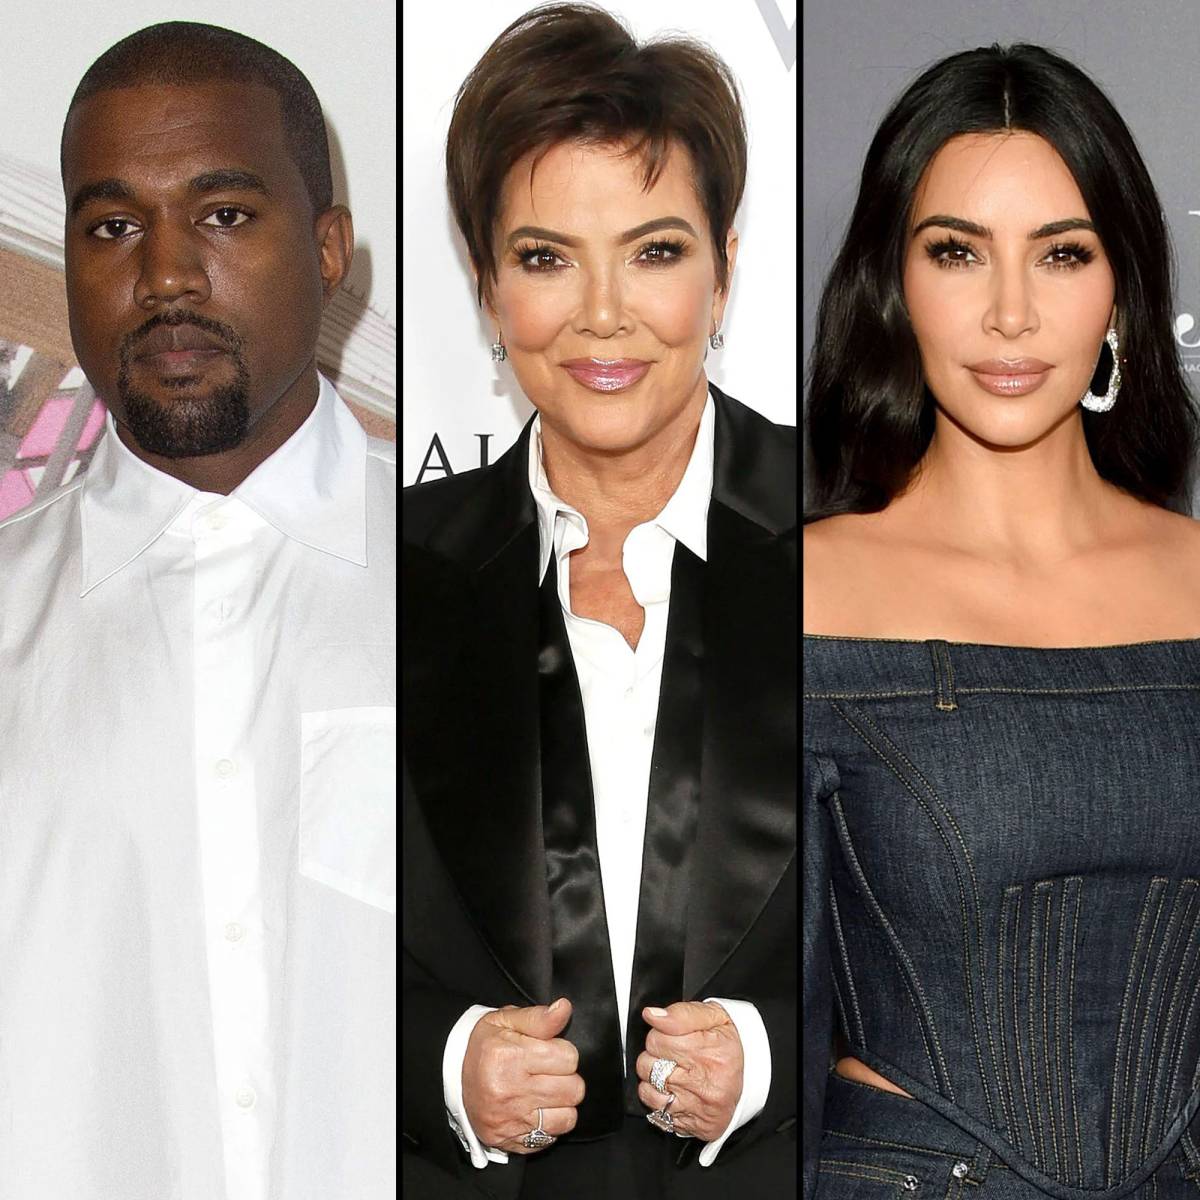 Pornes Mobi Hd 14yars Boys - Kanye West Calls Out Kris Jenner, Claims Porn 'Destroyed' Family